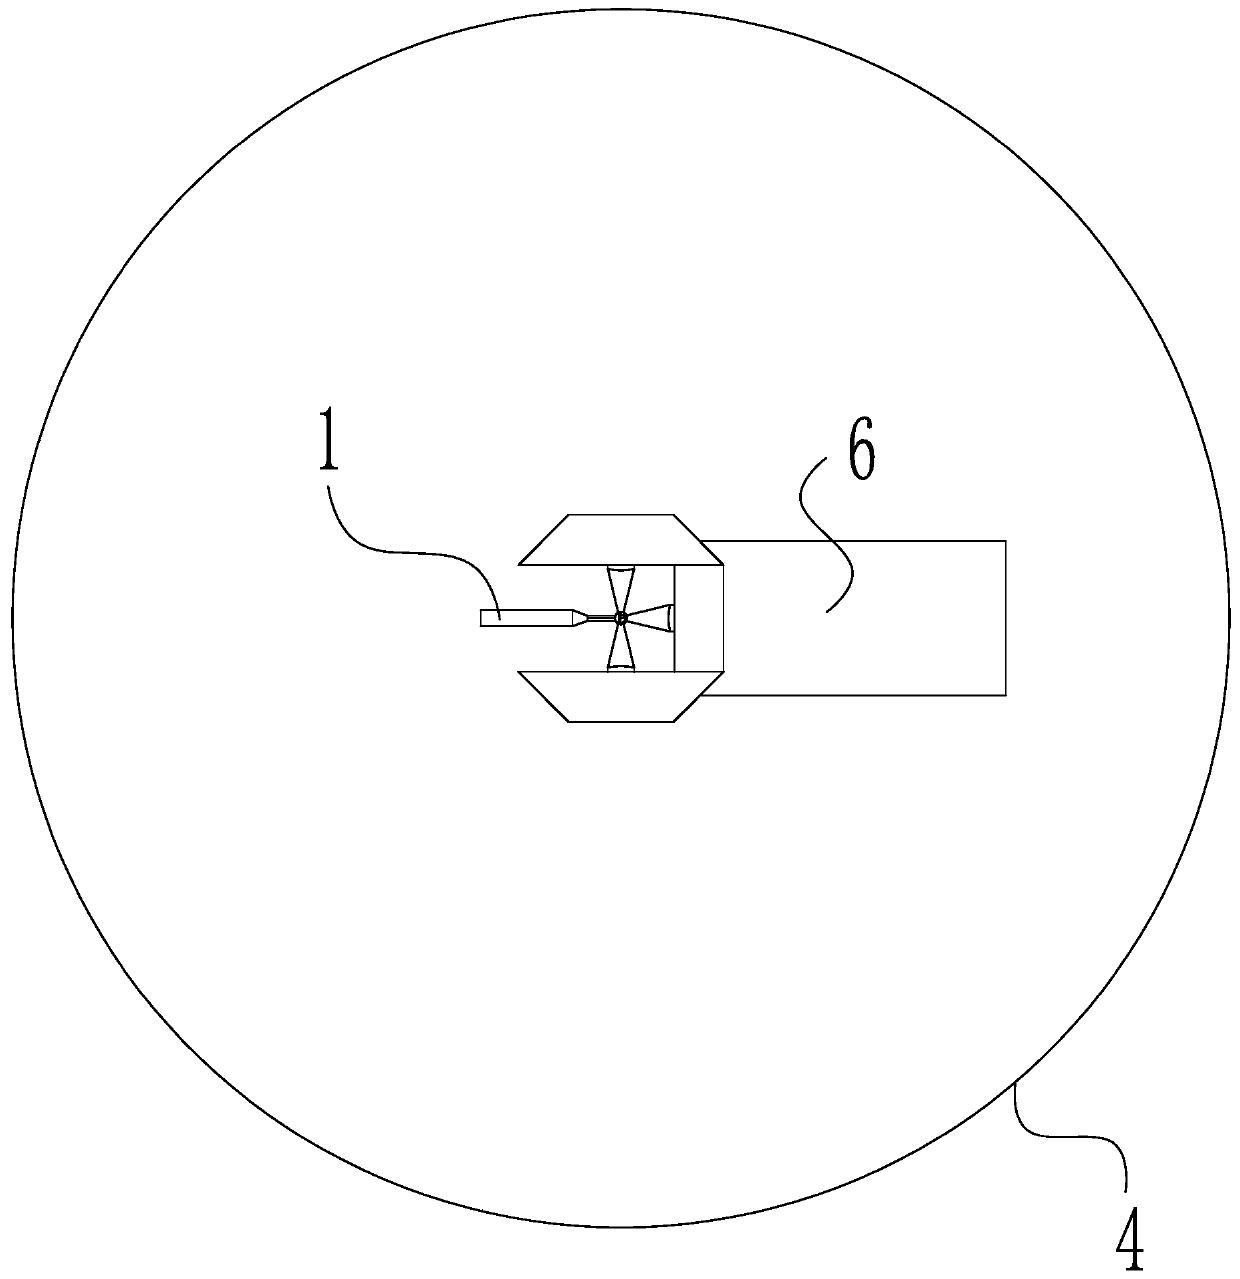 Aiming method of physical diagnostic equipment based on reflective ball tracking ball target